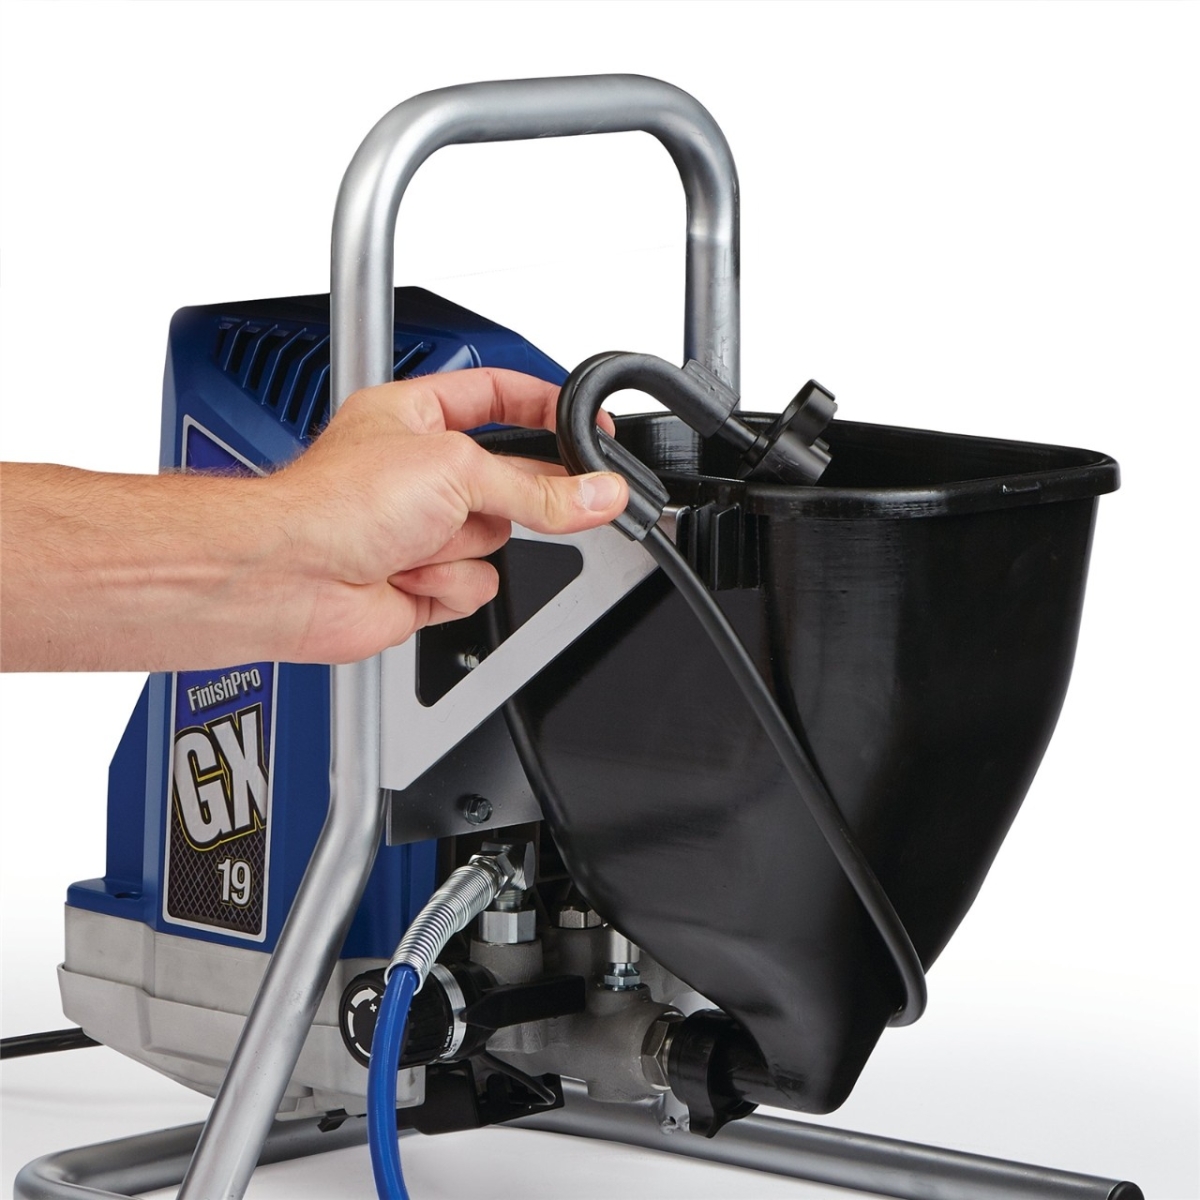 Graco FinishPro GX 19 Electric Airless Sprayer with Hopper